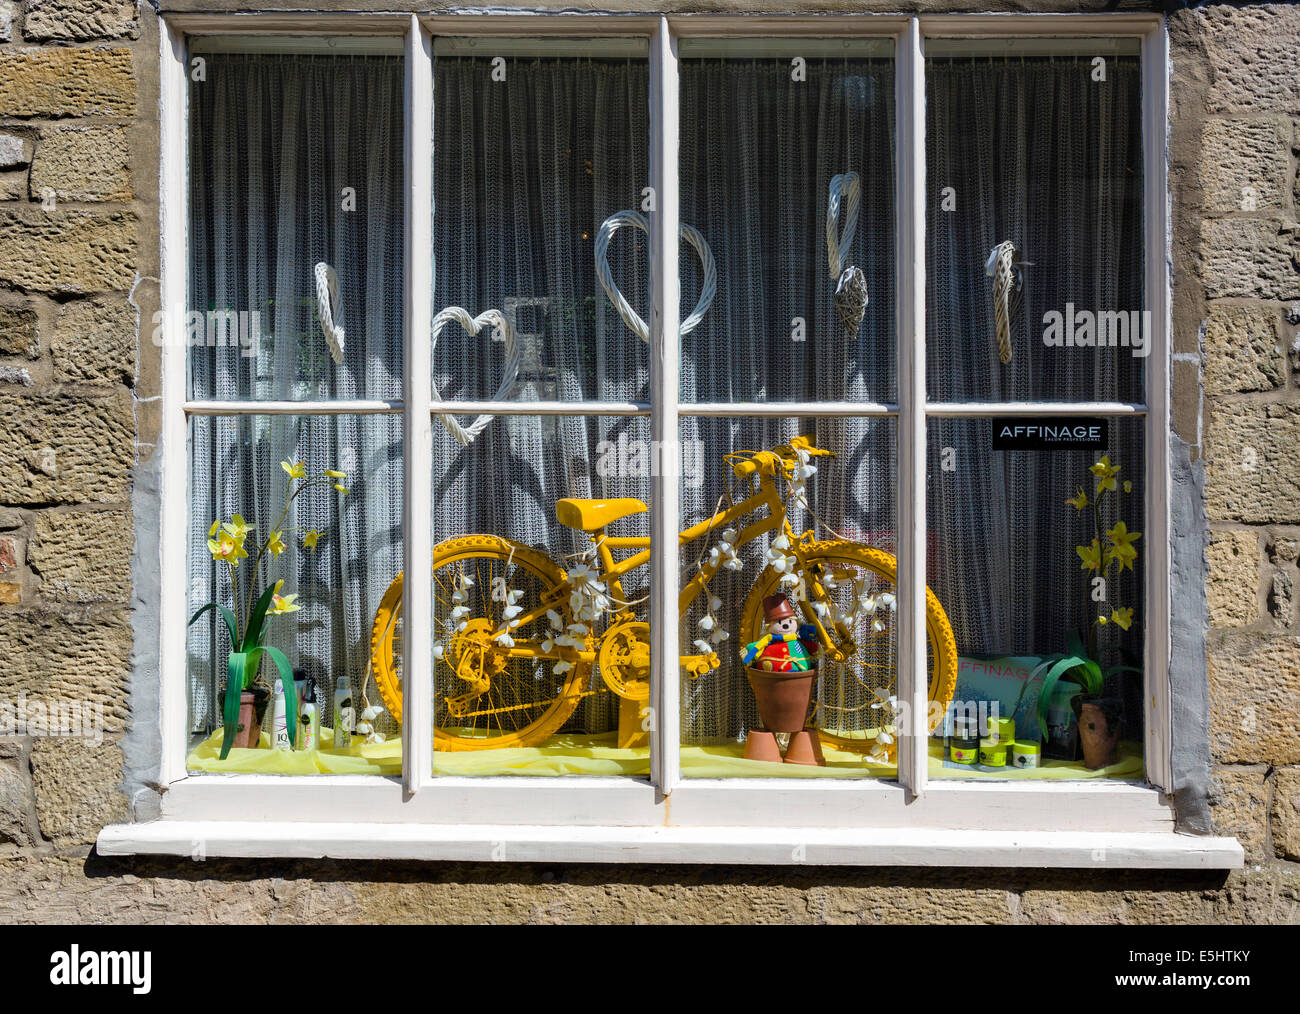 Yellow bicycle in a shop window, celebration the 2014 Tour de France Grand Depart in Yorkshire, Settle, North Yorkshire, UK Stock Photo